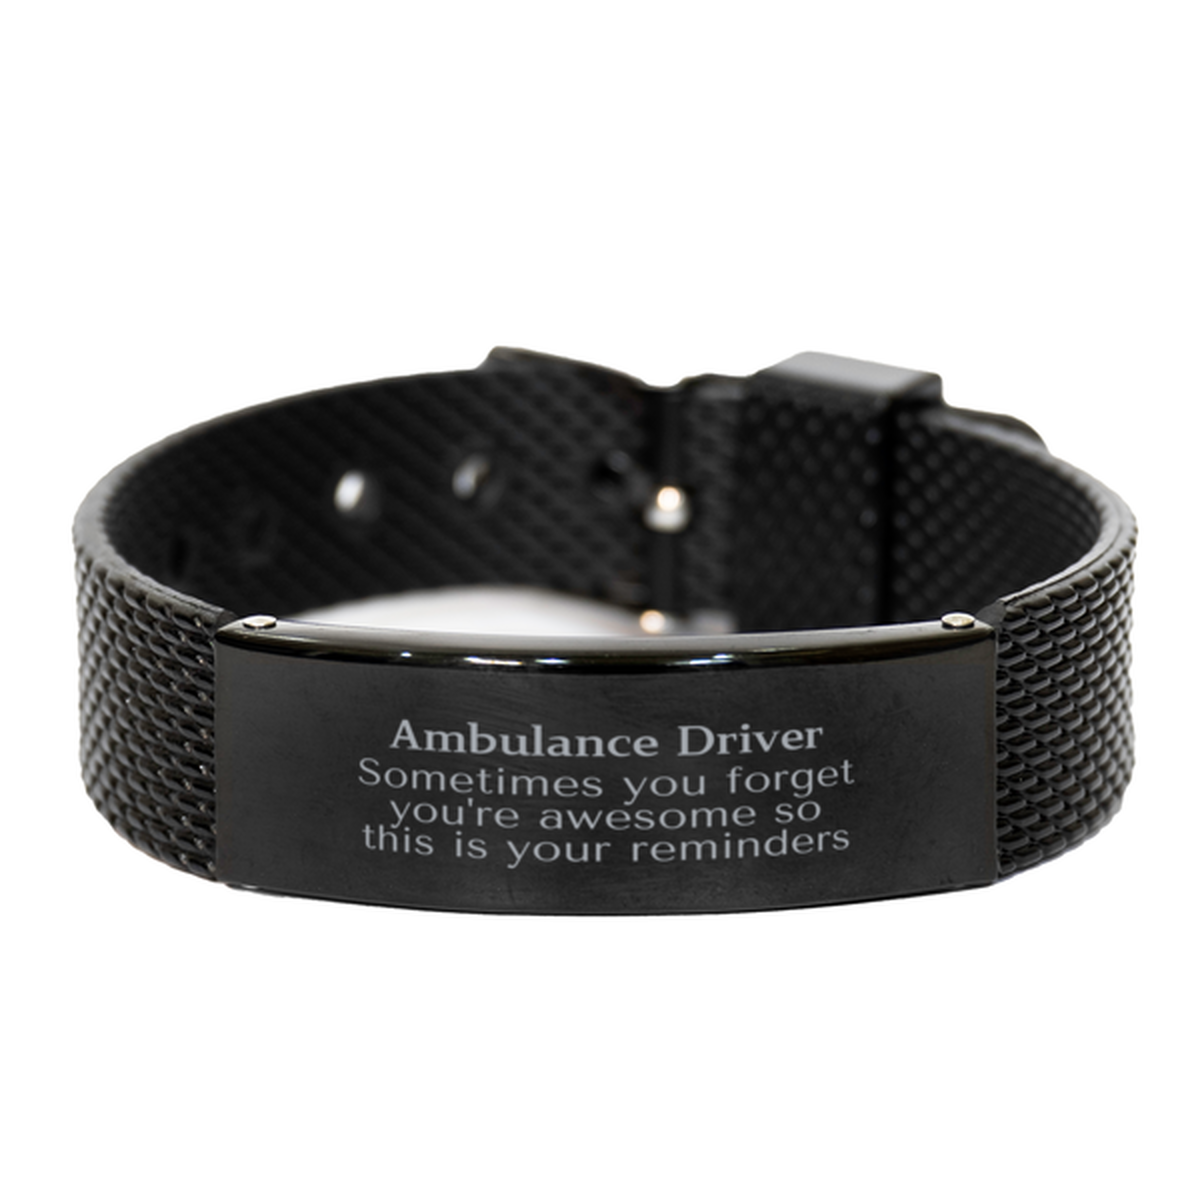 Sentimental Ambulance Driver Black Shark Mesh Bracelet, Ambulance Driver Sometimes you forget you're awesome so this is your reminders, Graduation Christmas Birthday Gifts for Ambulance Driver, Men, Women, Coworkers